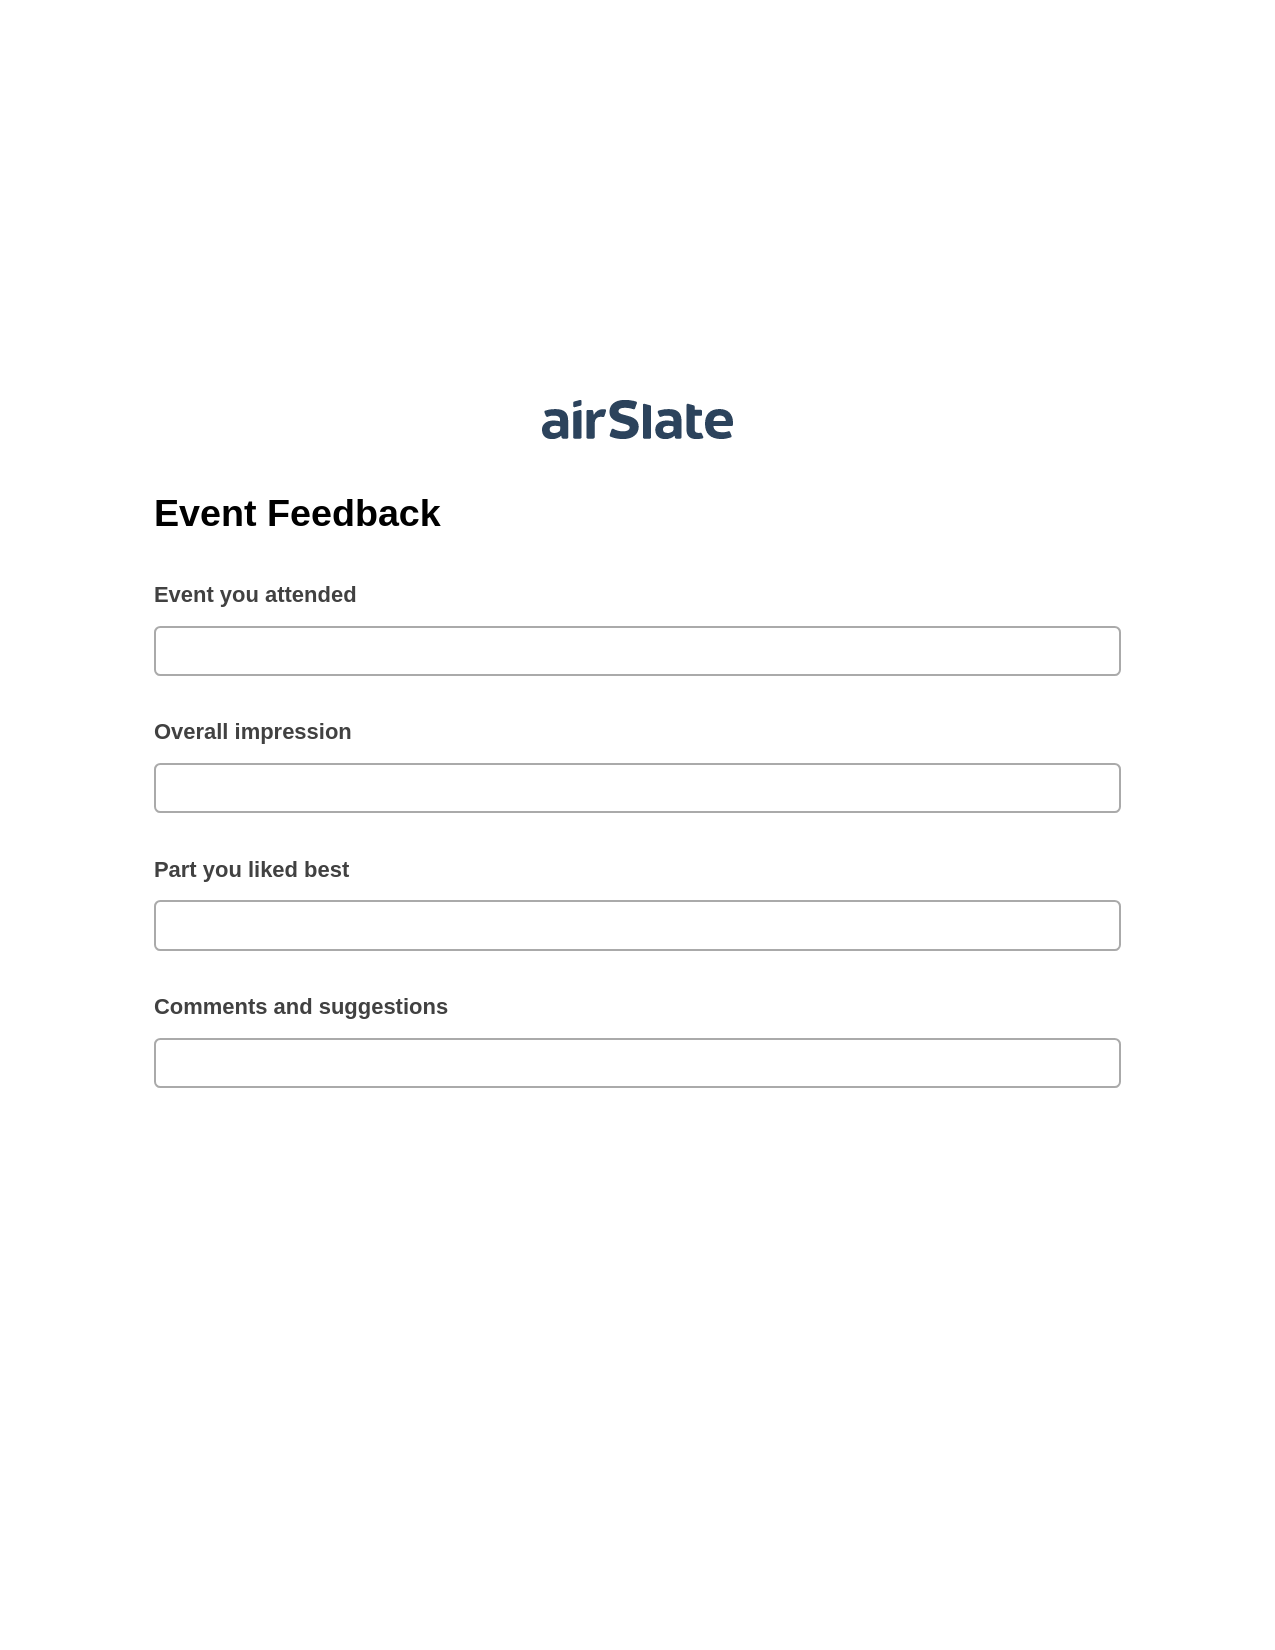 Event Feedback Pre-fill from AirTable Bot, Lock the slate bot, Export to Smartsheet